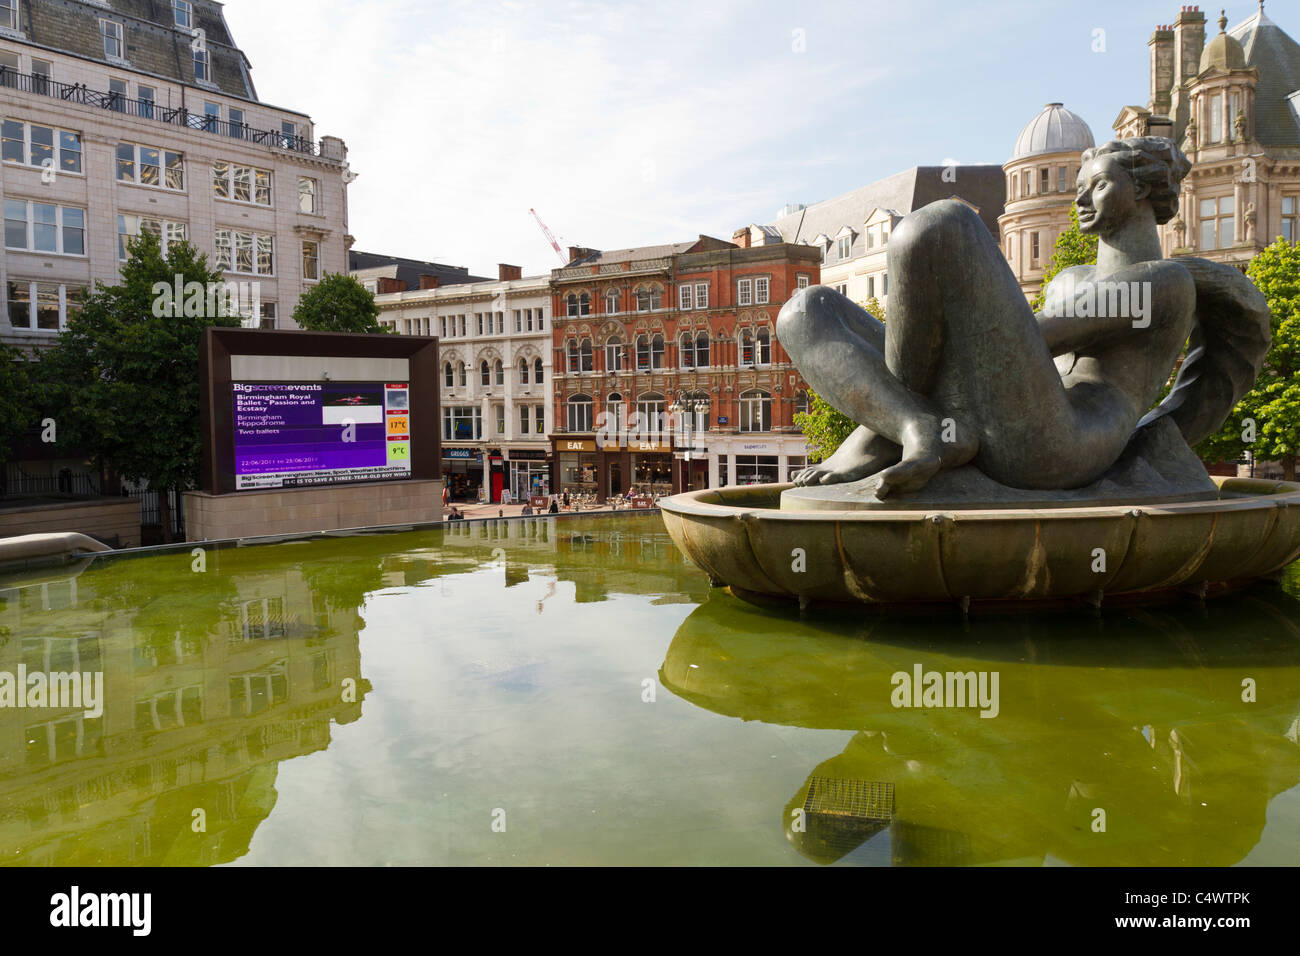 The floozie in the jacuzzi statue in Victoria square Birmingham UK ...